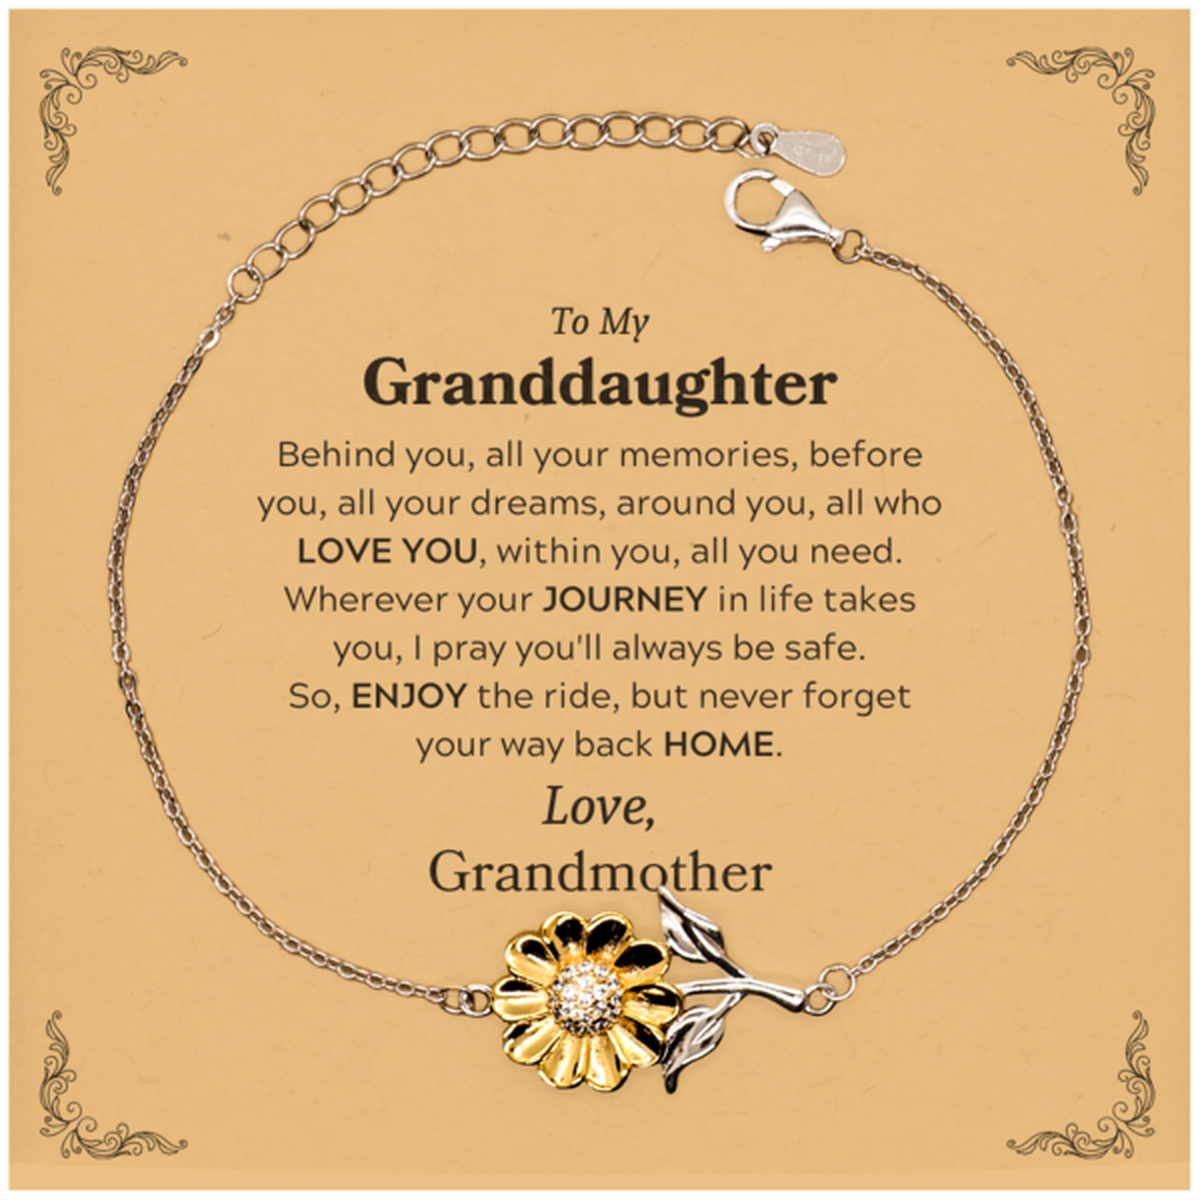 To My Granddaughter Graduation Gifts from Grandmother, Granddaughter Sunflower Bracelet Christmas Birthday Gifts for Granddaughter Behind you, all your memories, before you, all your dreams. Love, Grandmother